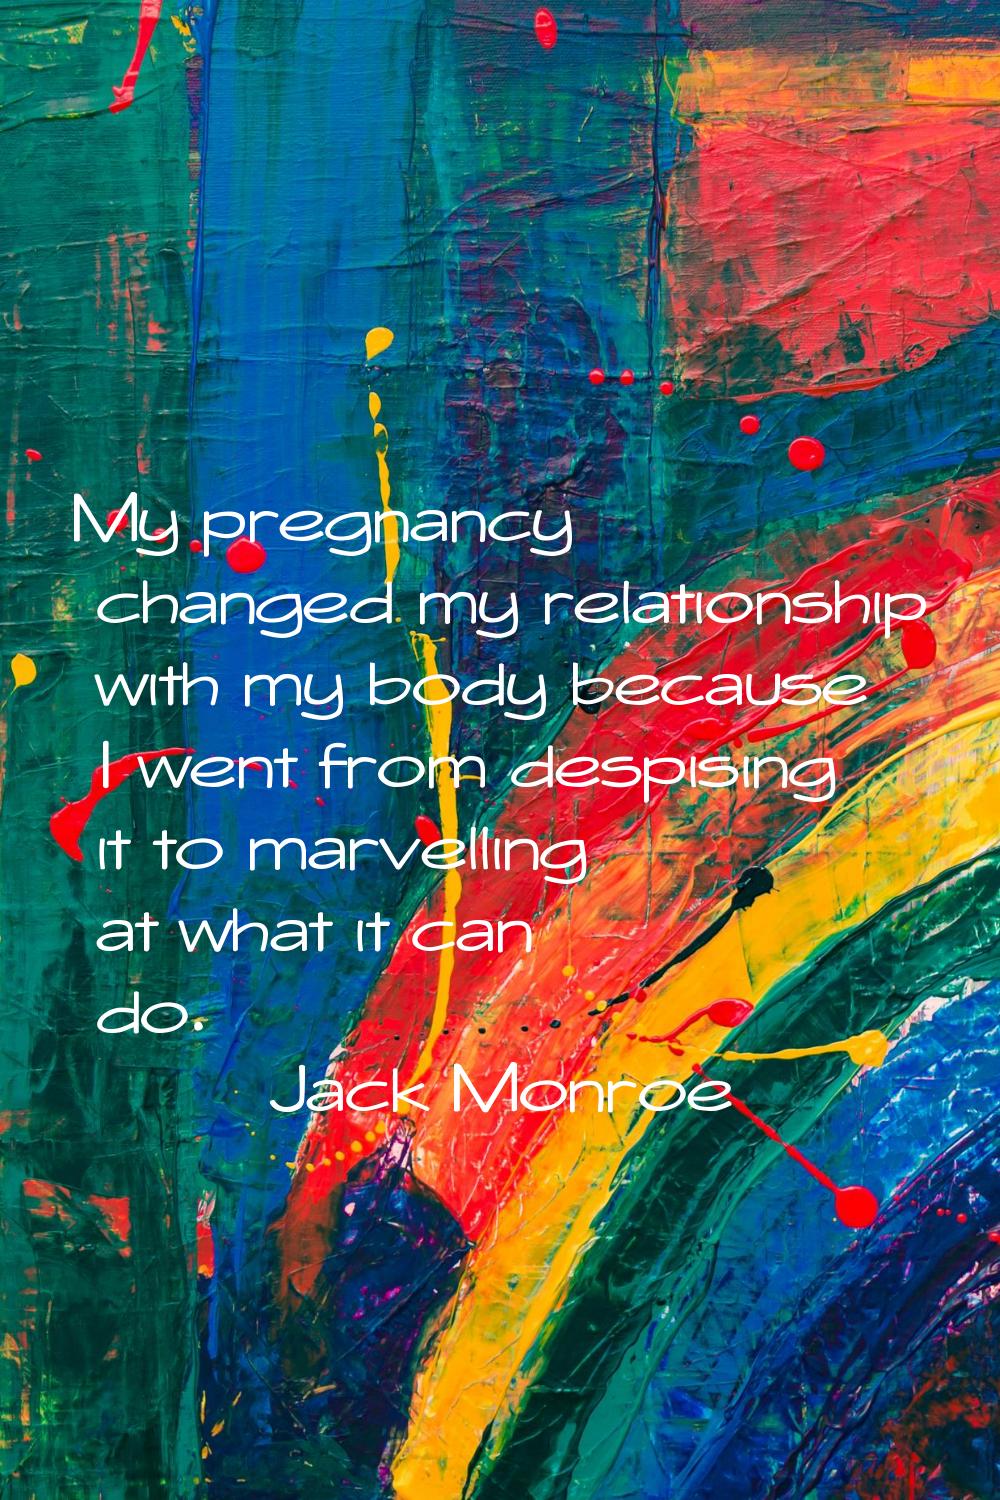 My pregnancy changed my relationship with my body because I went from despising it to marvelling at